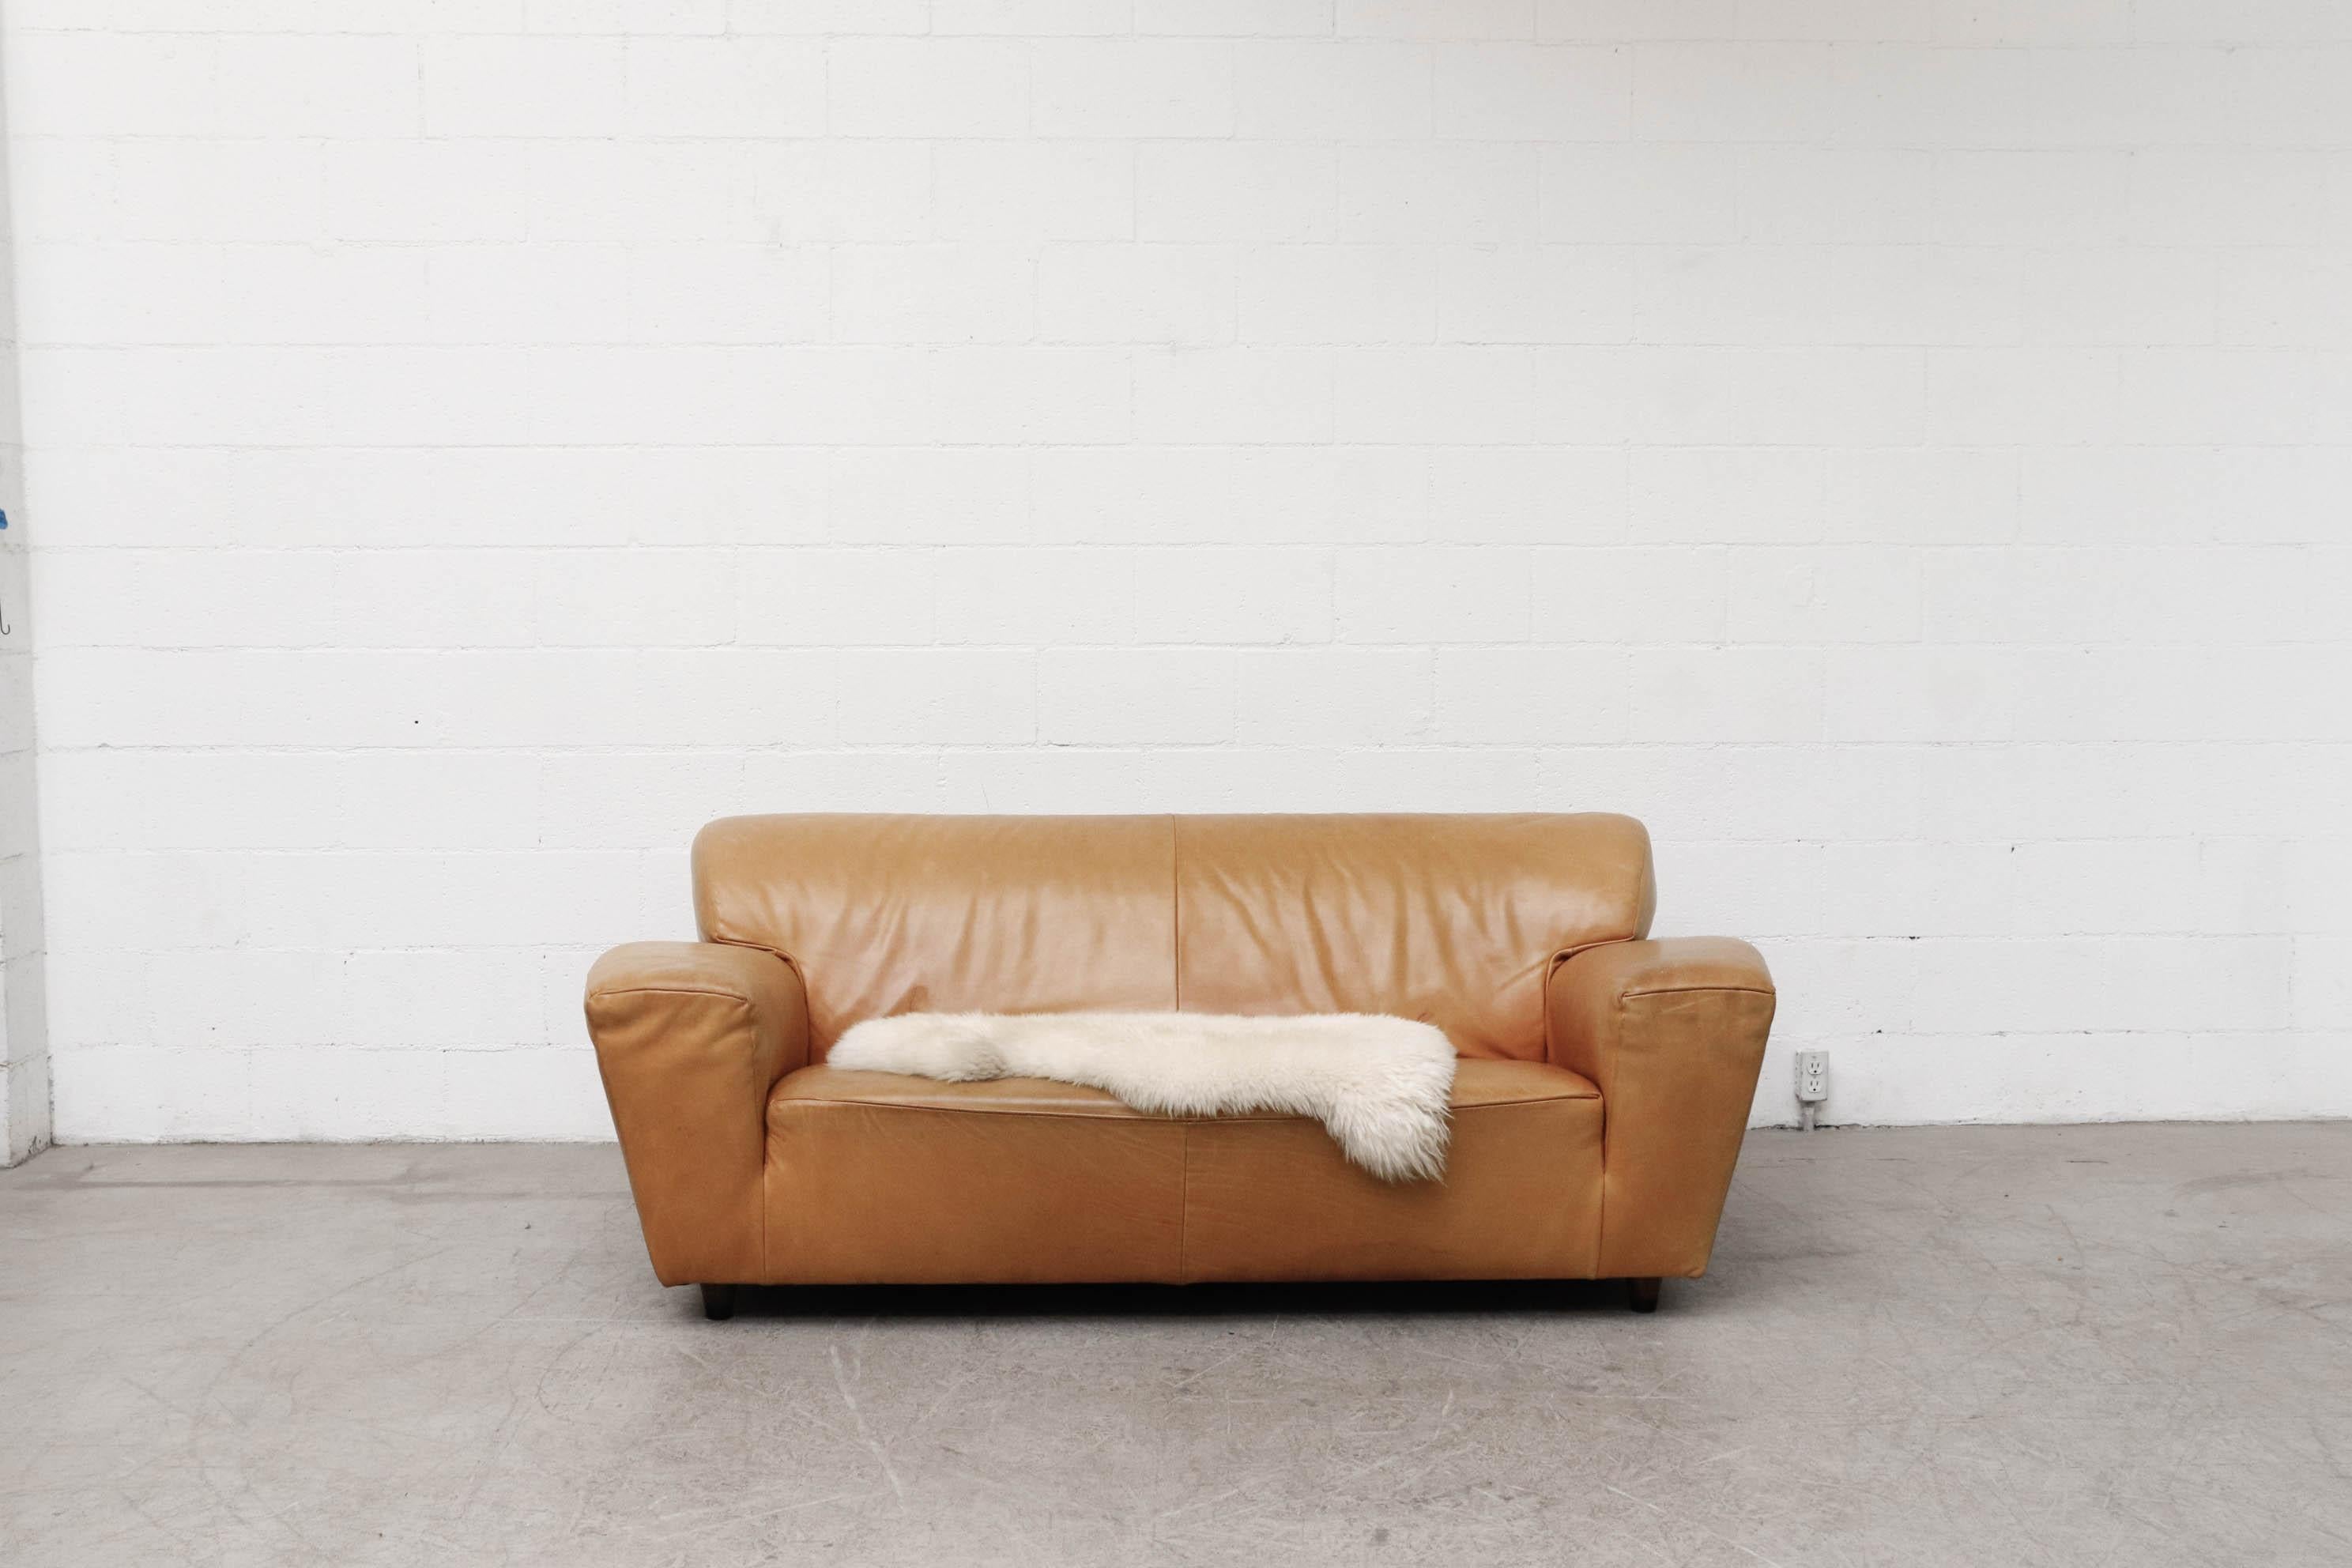 Gerard van den Berg 'Corvette' sofa in cognac leather with short tapered wood legs. In original condition with some visible wear and scratching consistent with age and use. Some denting to the leather from transport, it should relax over time.